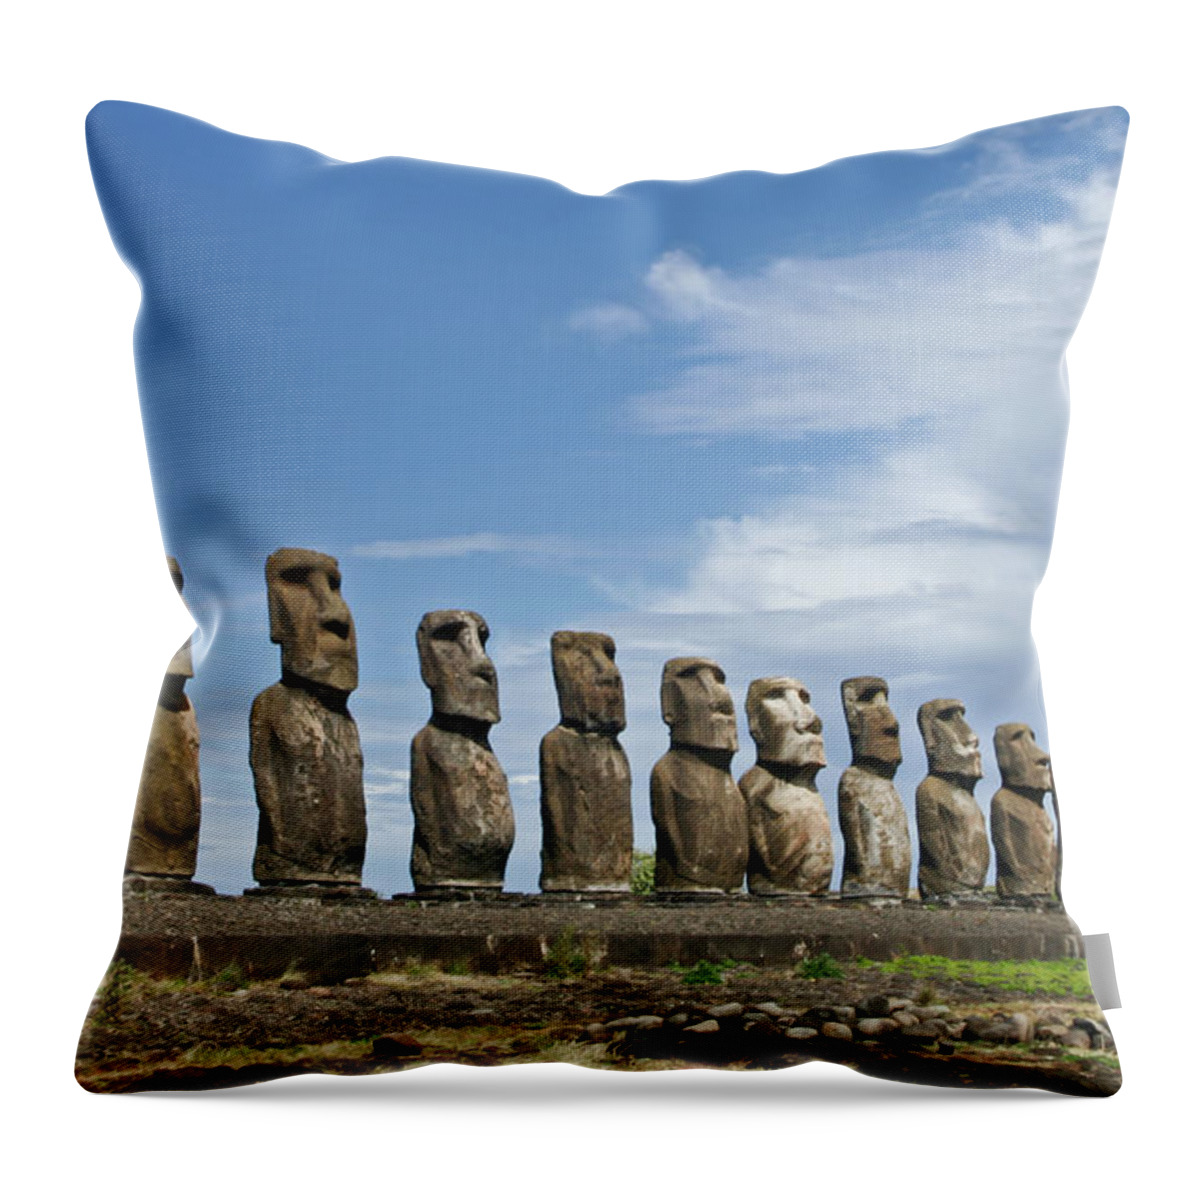 Tranquility Throw Pillow featuring the photograph Easter Island - Moai In A Row In Ahu by © Frédéric Collin